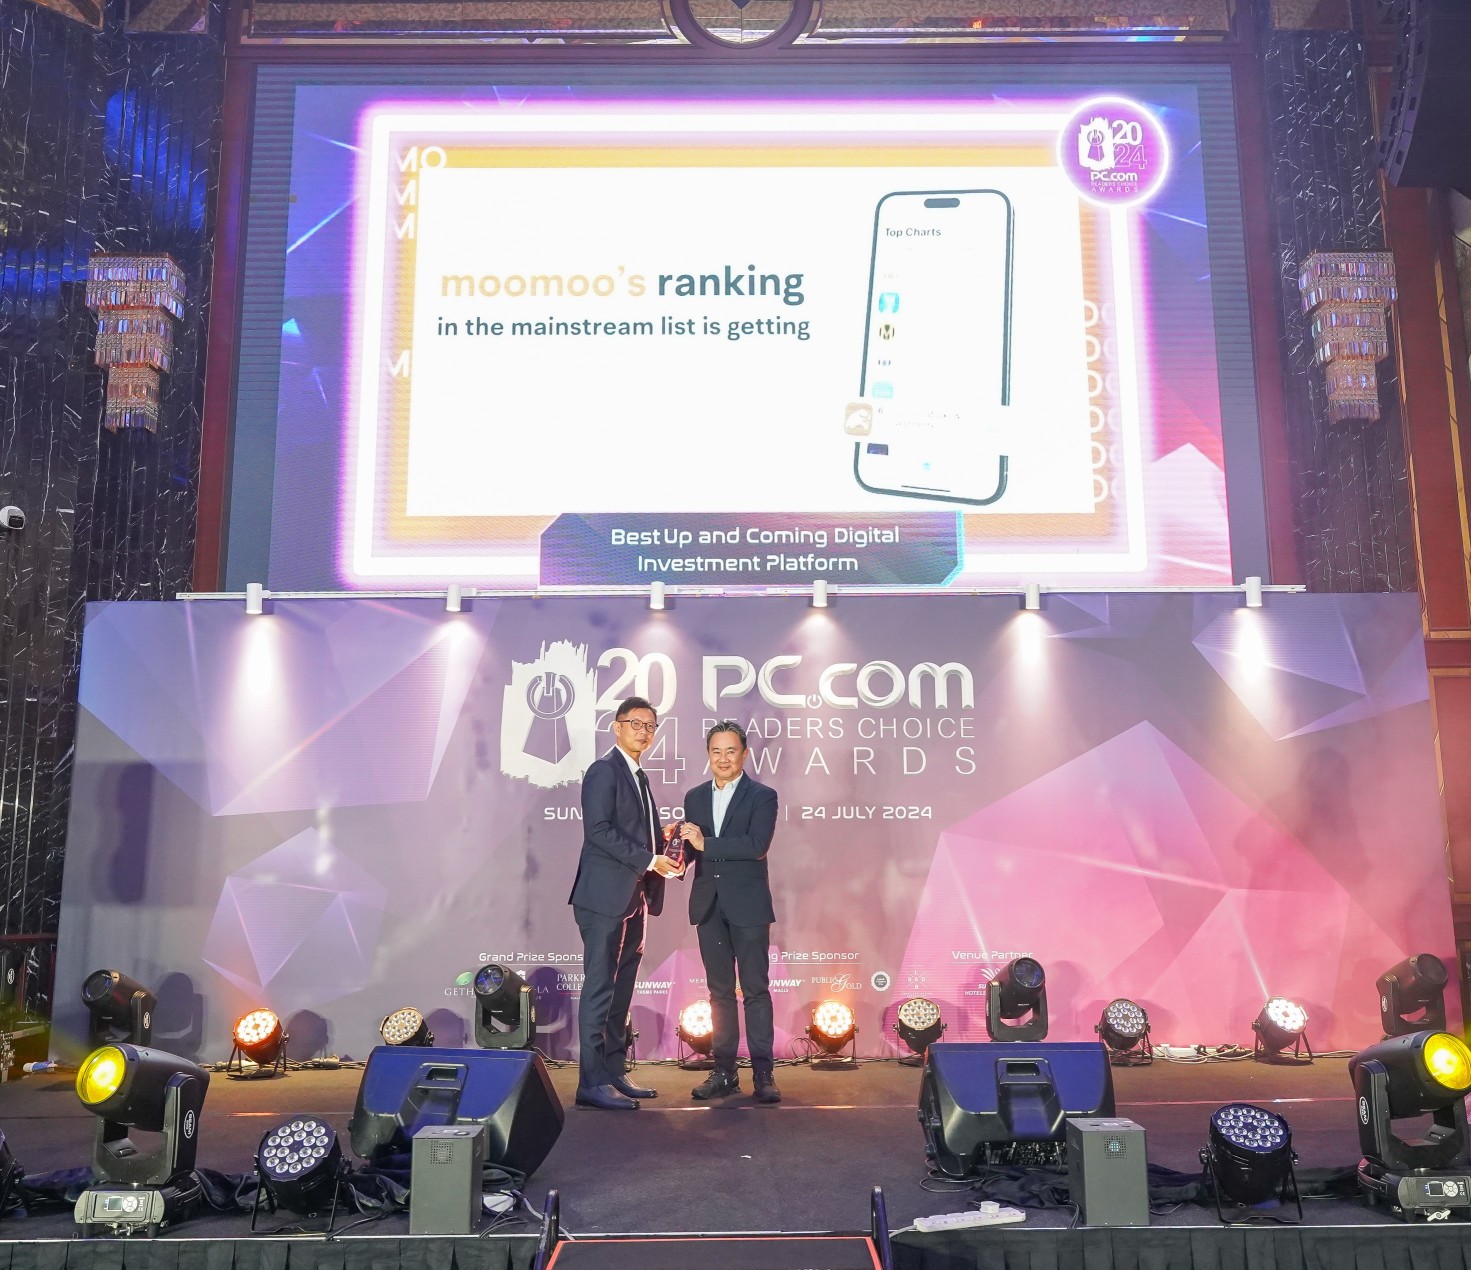 Moomoo Malaysia Clinched "Best Up and Coming Digital Investment Platform" Award, Winning Industry-wide Recognition within Five Months Since its Launch